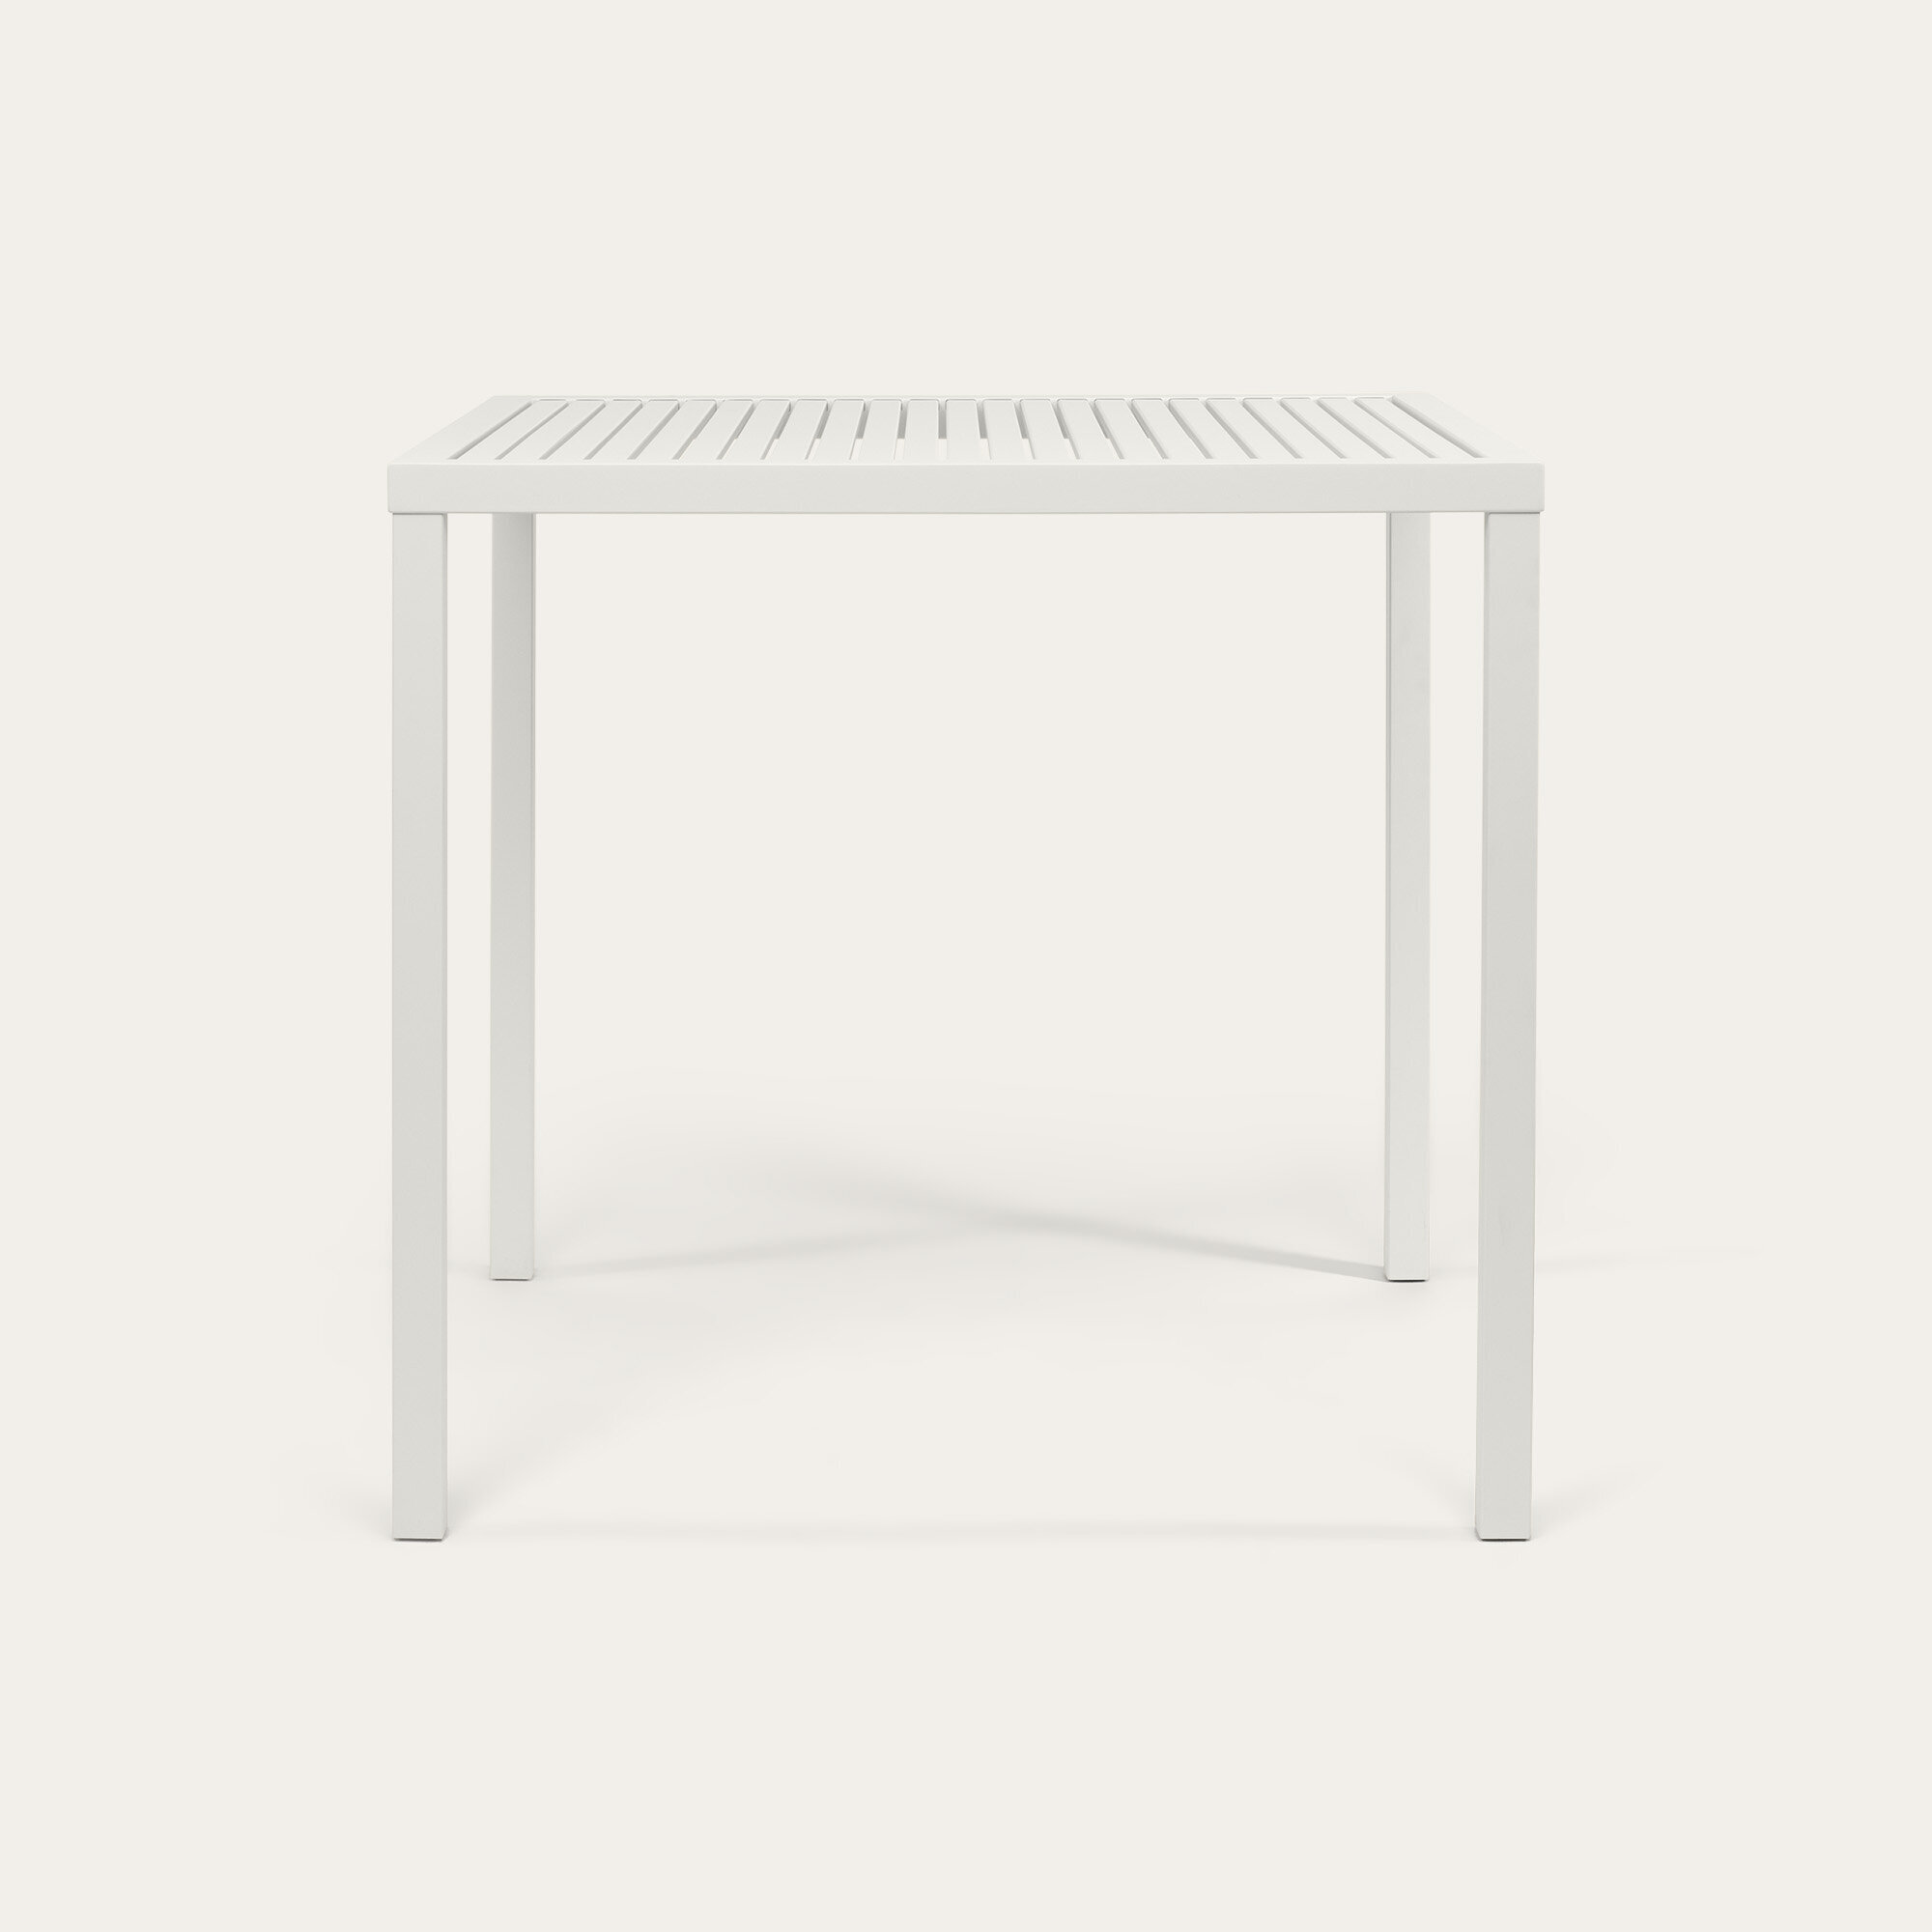 Square outdoor Design dining table | Trace Outdoor Table  White powdercoating KTL | White Powdercoat KTL | Studio HENK| 